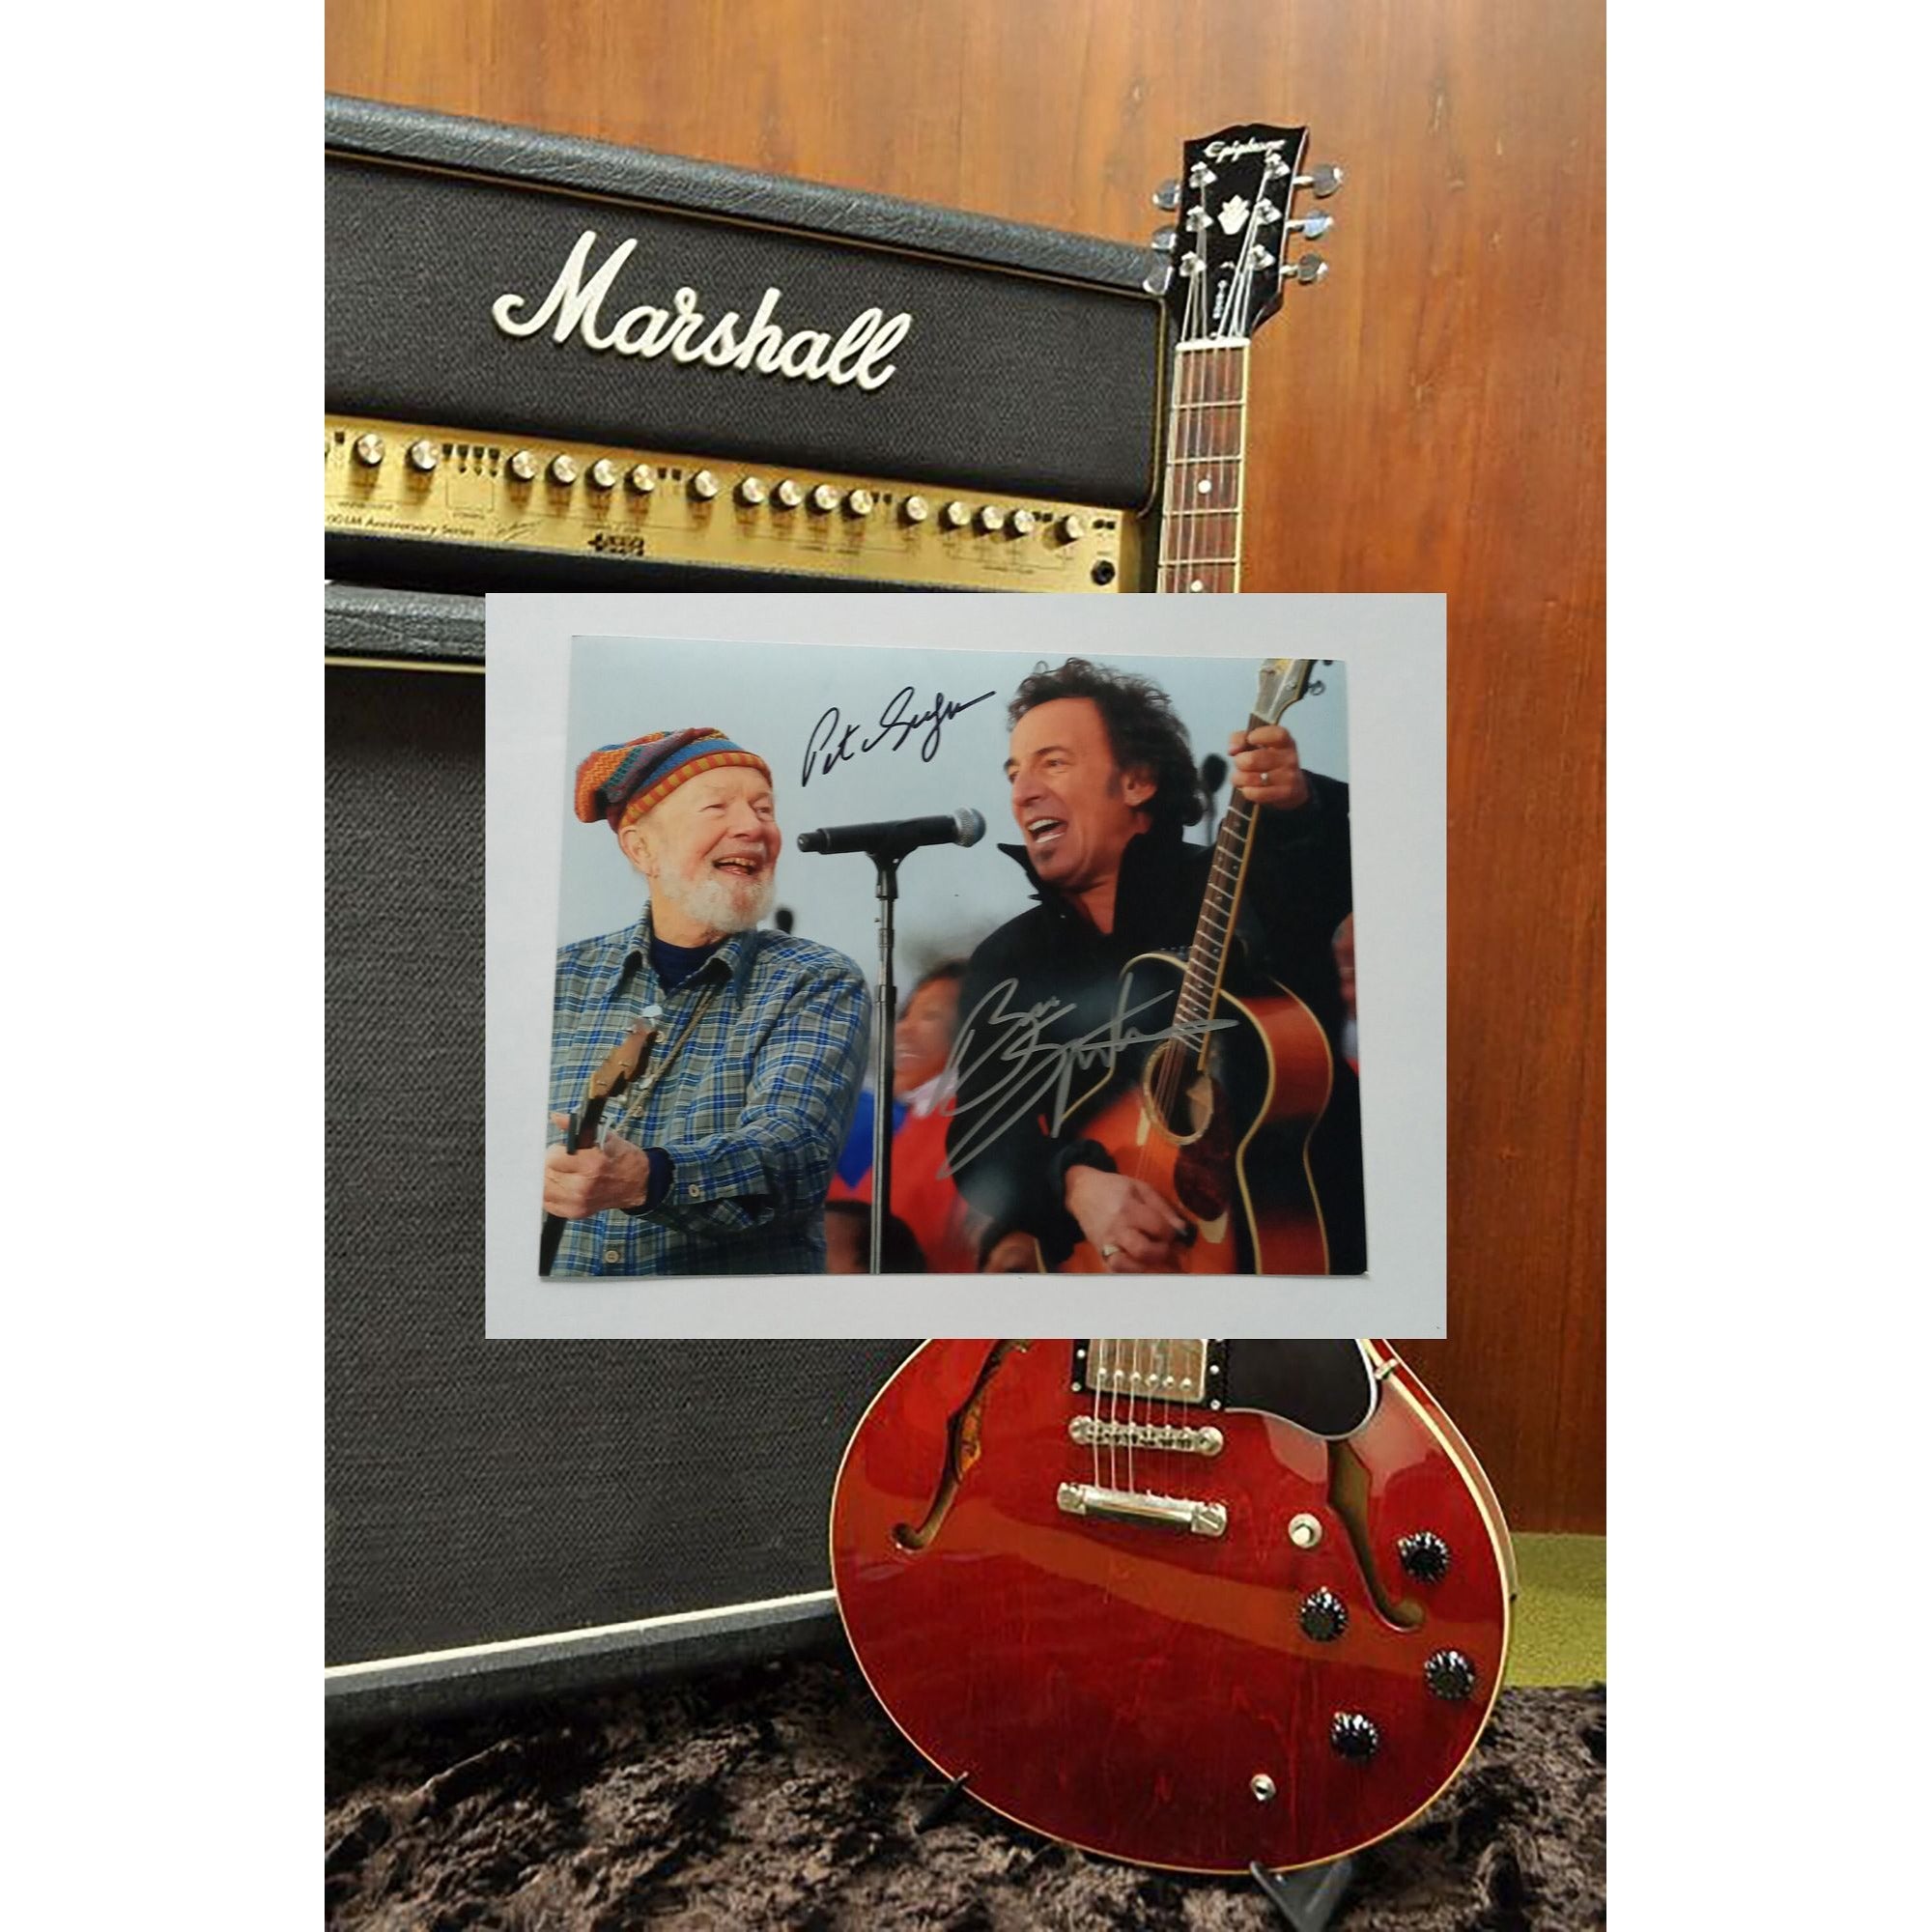 Bruce Springsteen and Pete Seeger 8 by 10 signed photo with proof